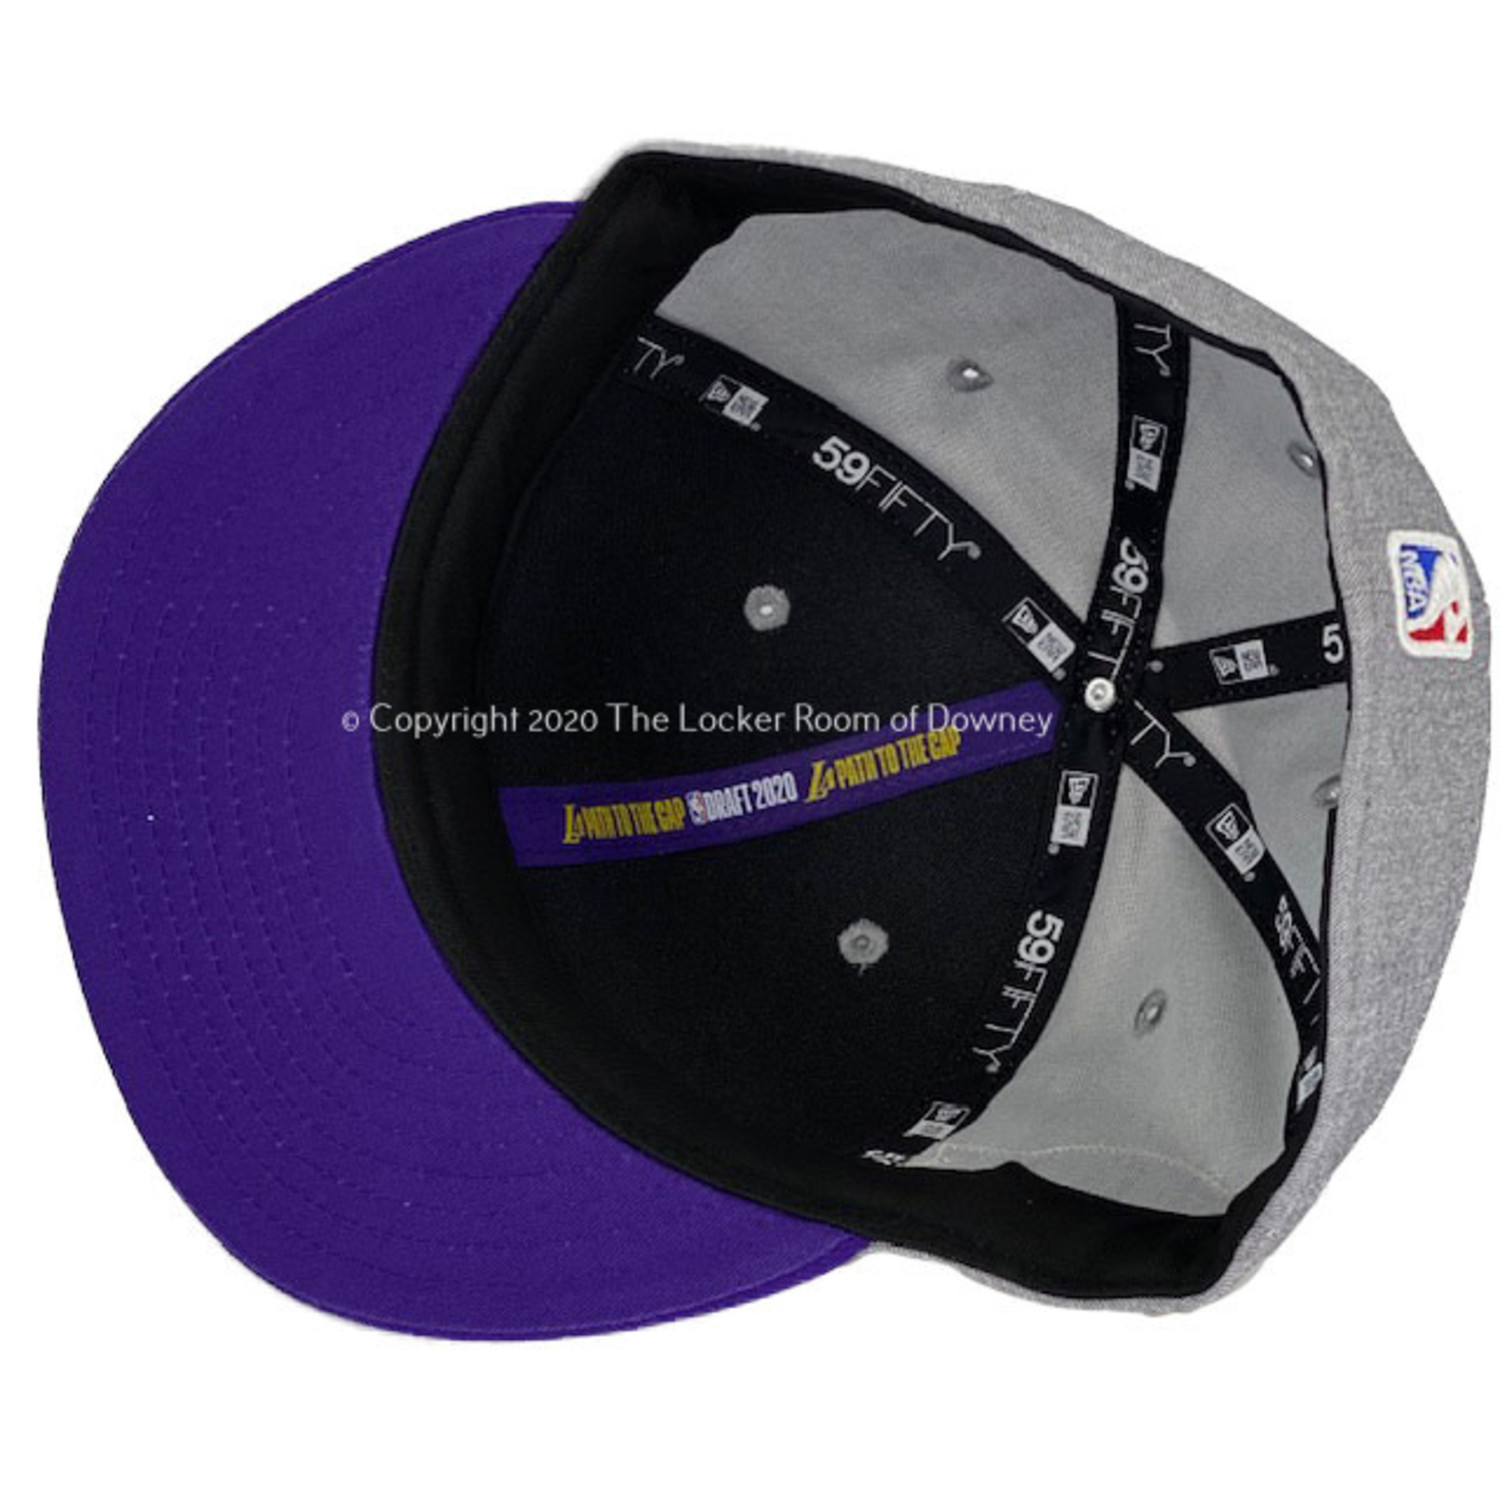 Lakers Hat LA Lakers Hat New Era Fitted 7 3/8 Los Angeles Lakers